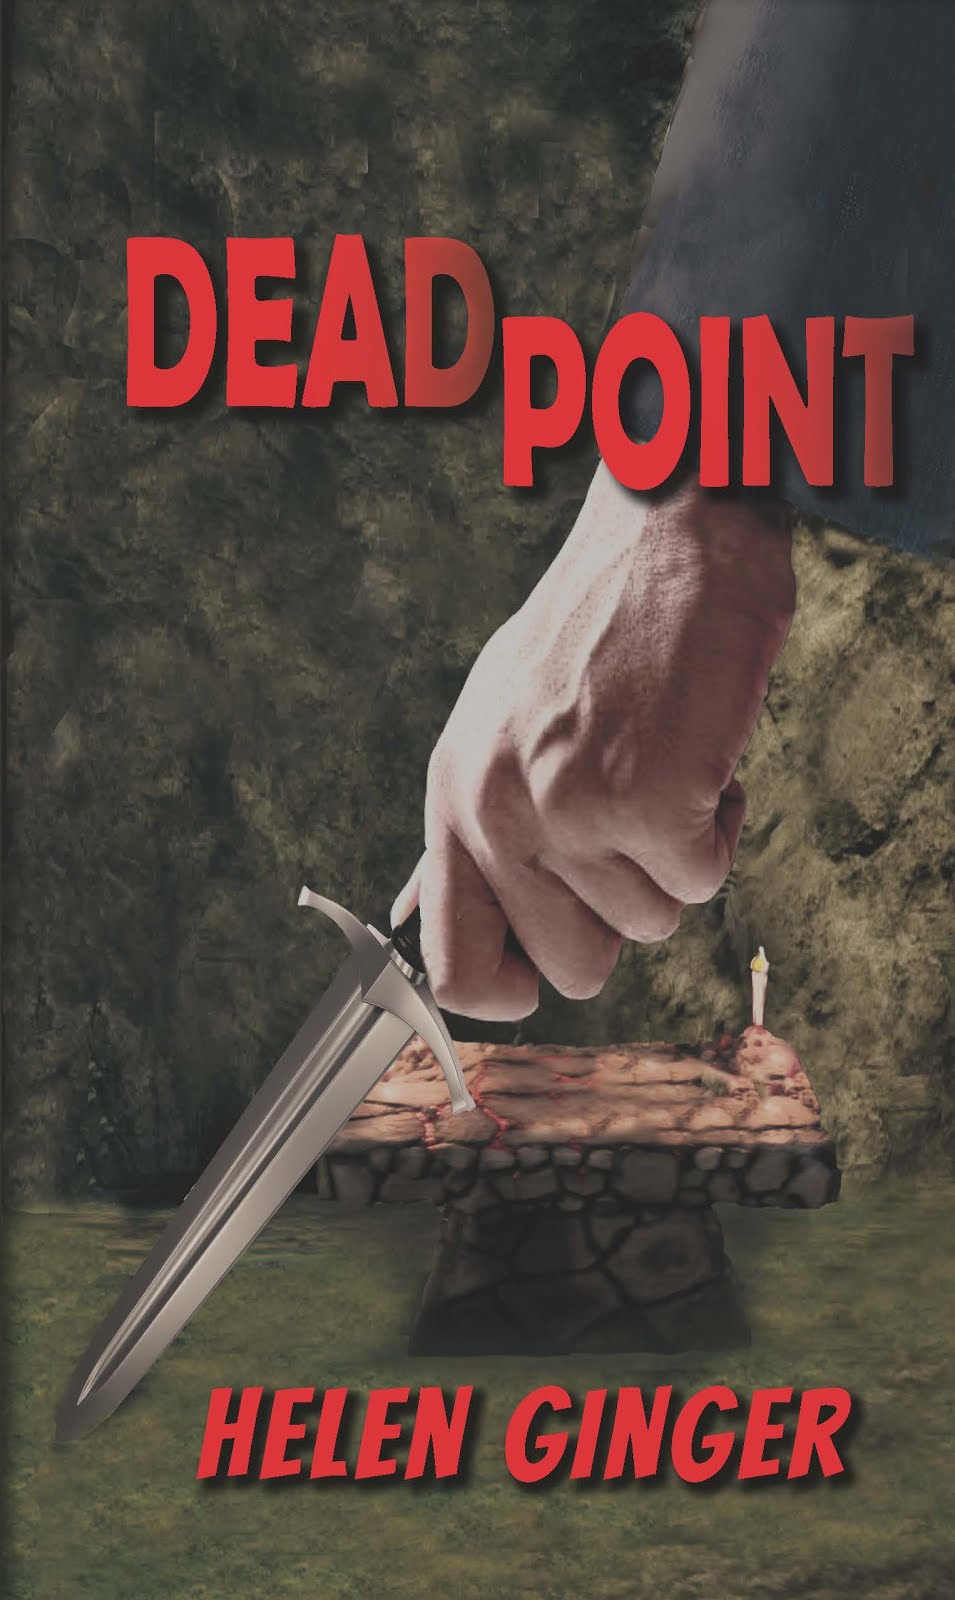 Deadpoint by Helen Ginger